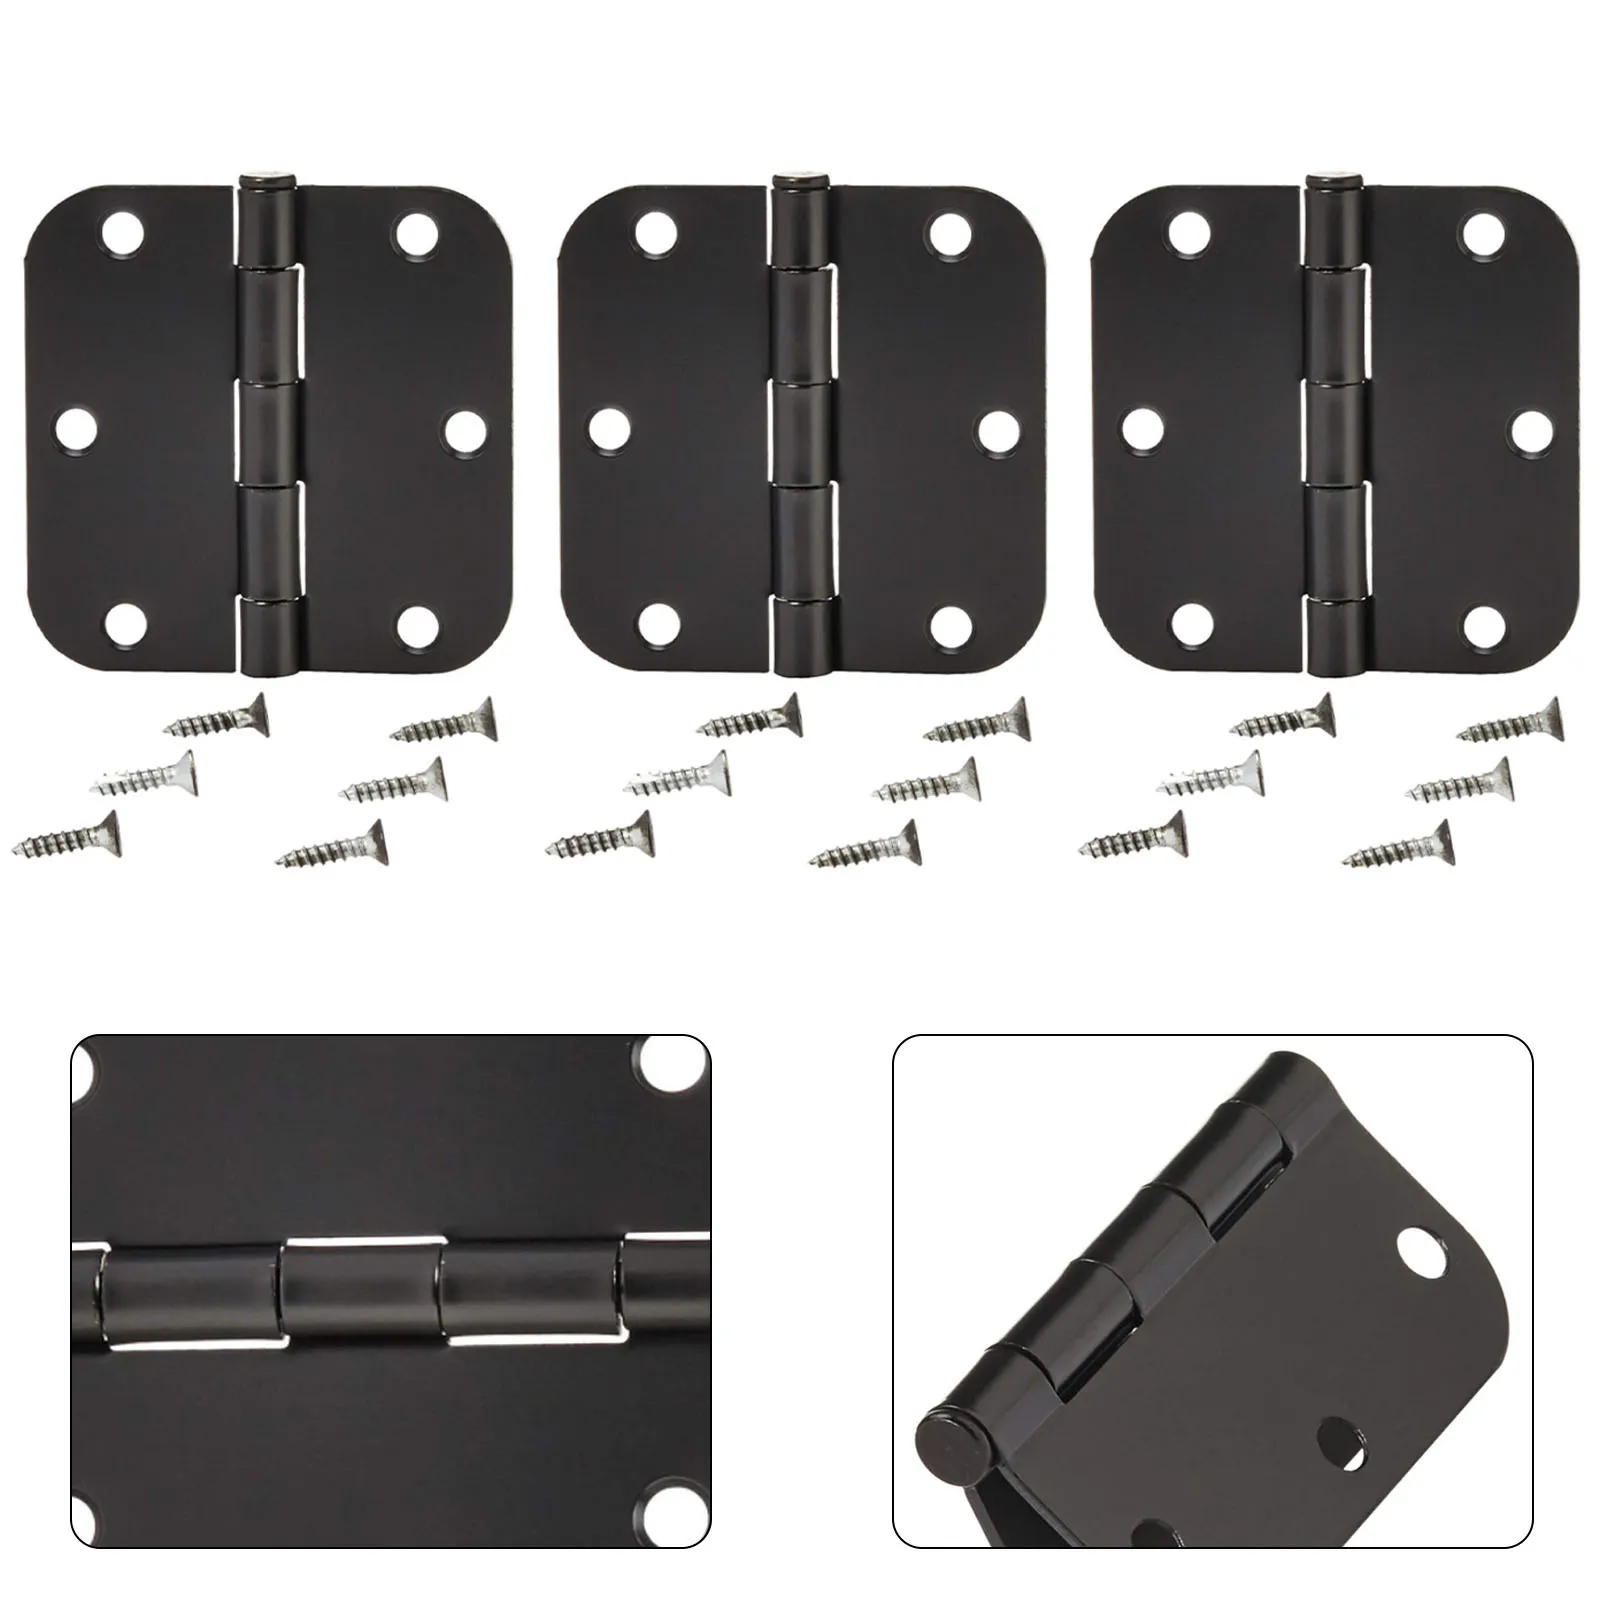 

Door Hinge With Nut Bolt Set Rounded 3.5Inch 3.54 X 1.97 X 0.59 Inches Matte Casement Hinge For Hotels HomeOffices Dormitories